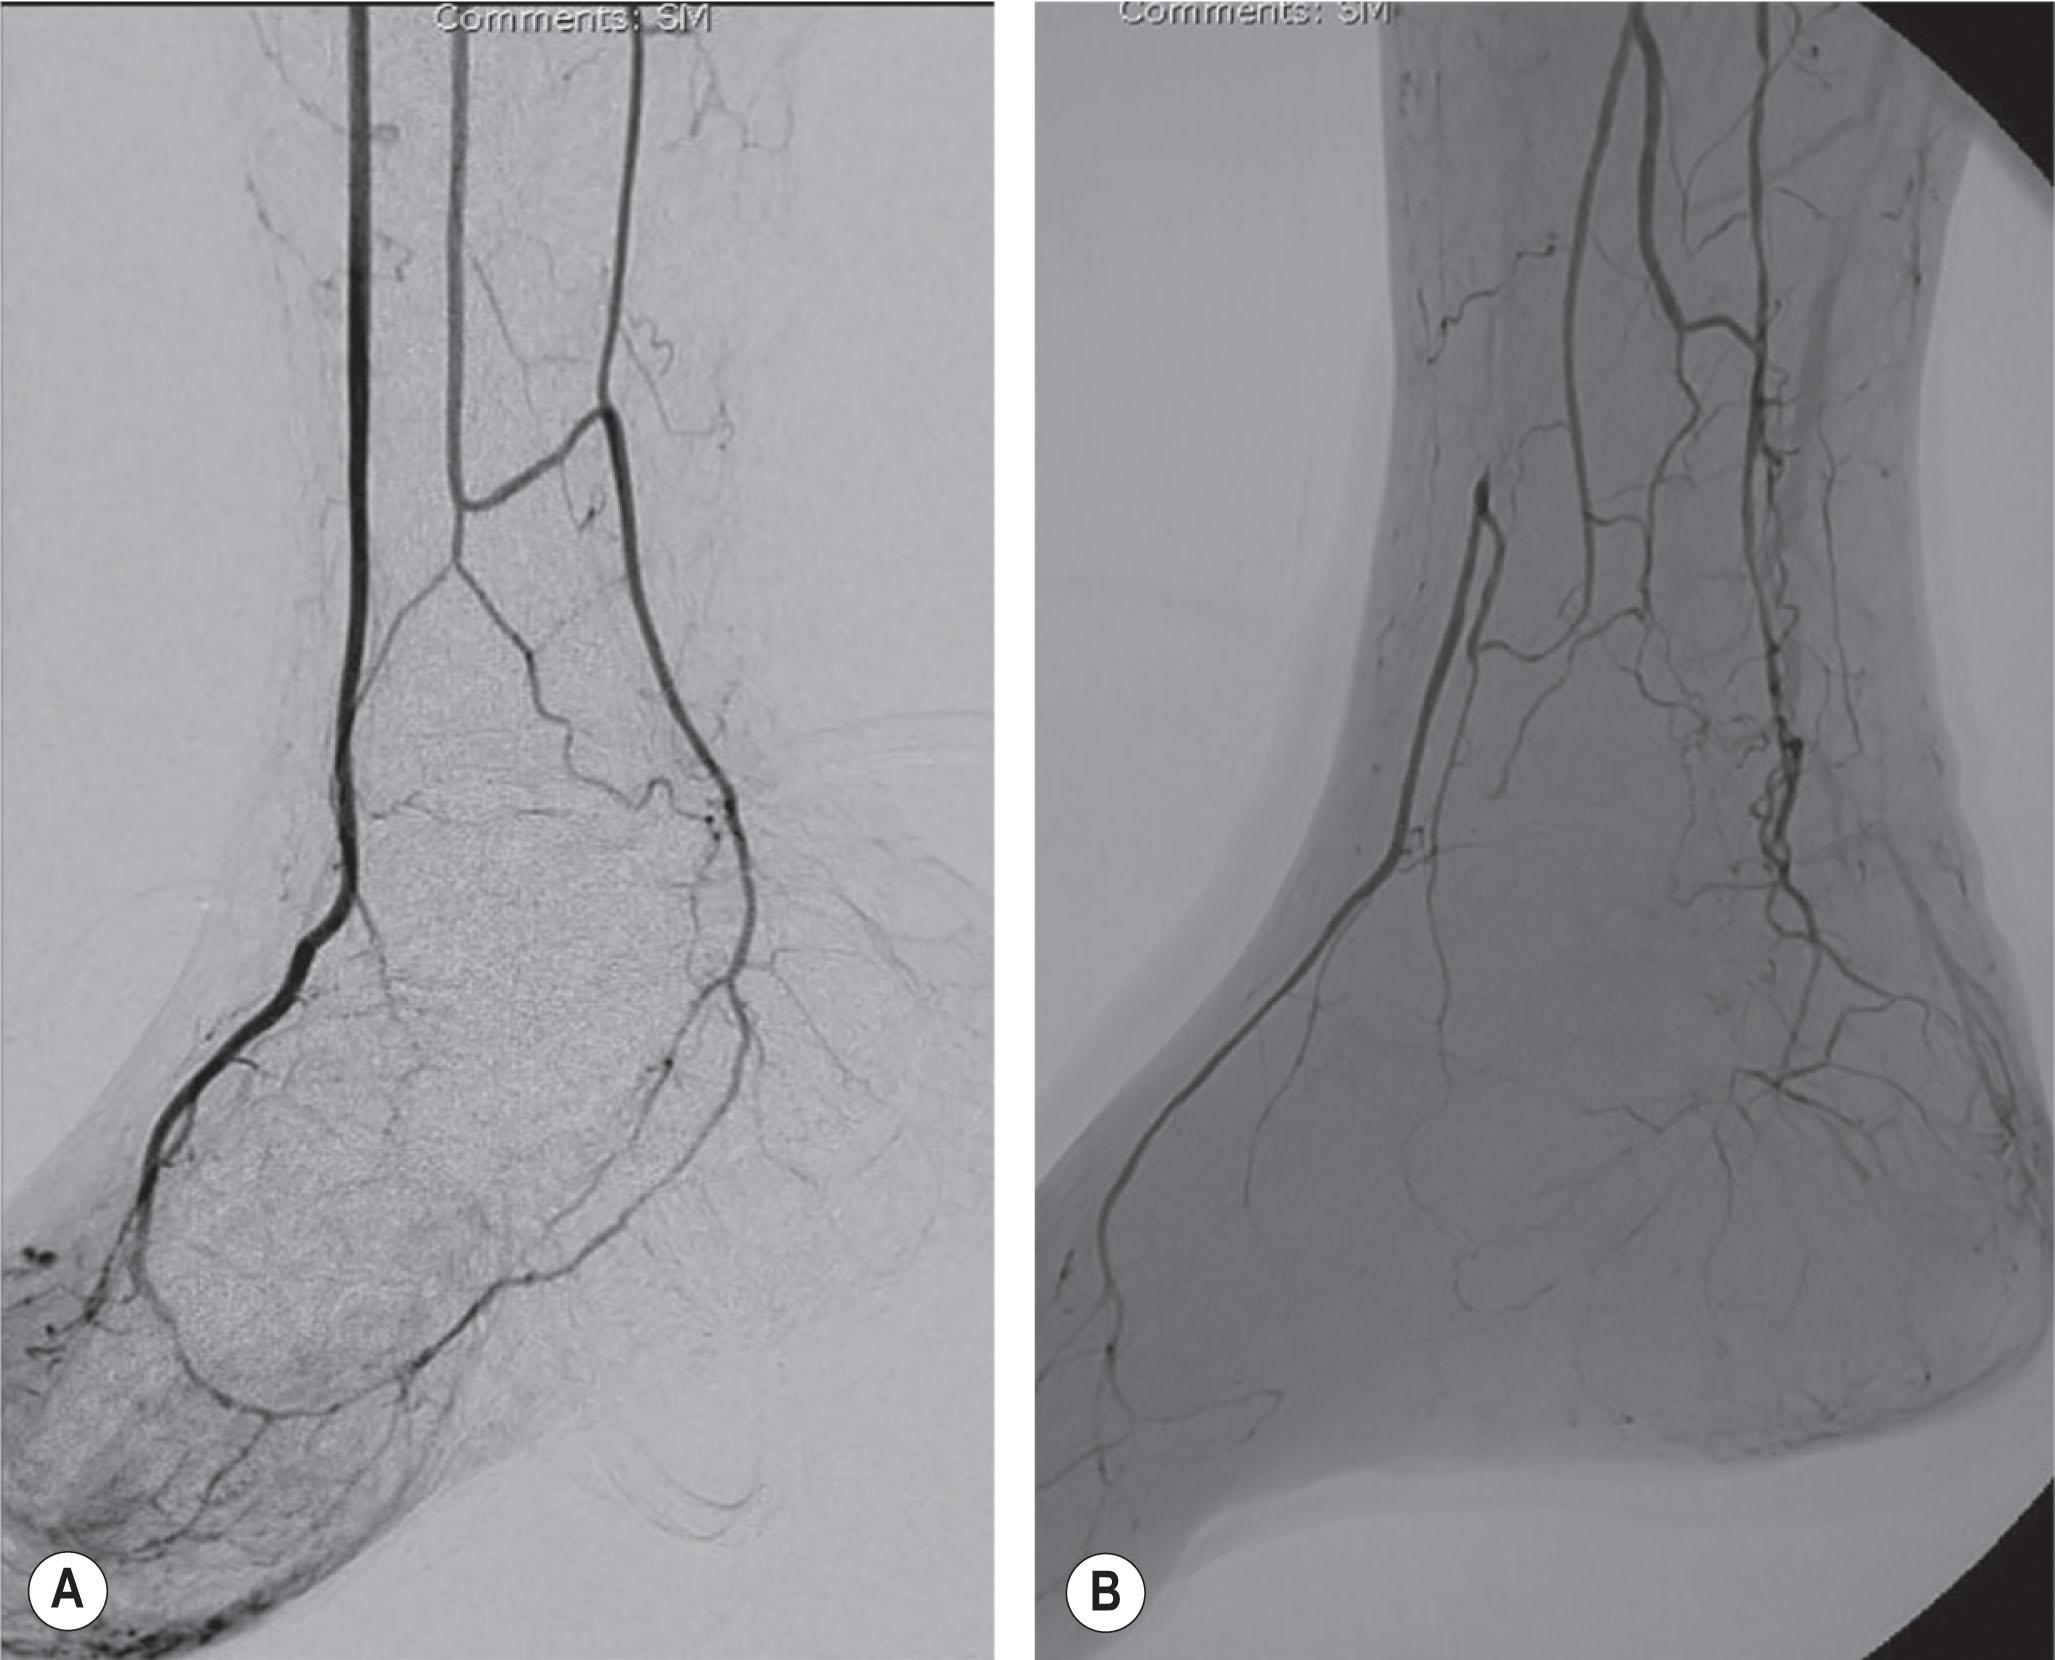 Figure 8.3, (A) The angiogram picture of the three important arterial–arterial connections. (B) The peroneal artery can restore blood flow to both an occluded anterior tibial artery and a severely diseased posterior tibial artery via the arterial–arterial connections.